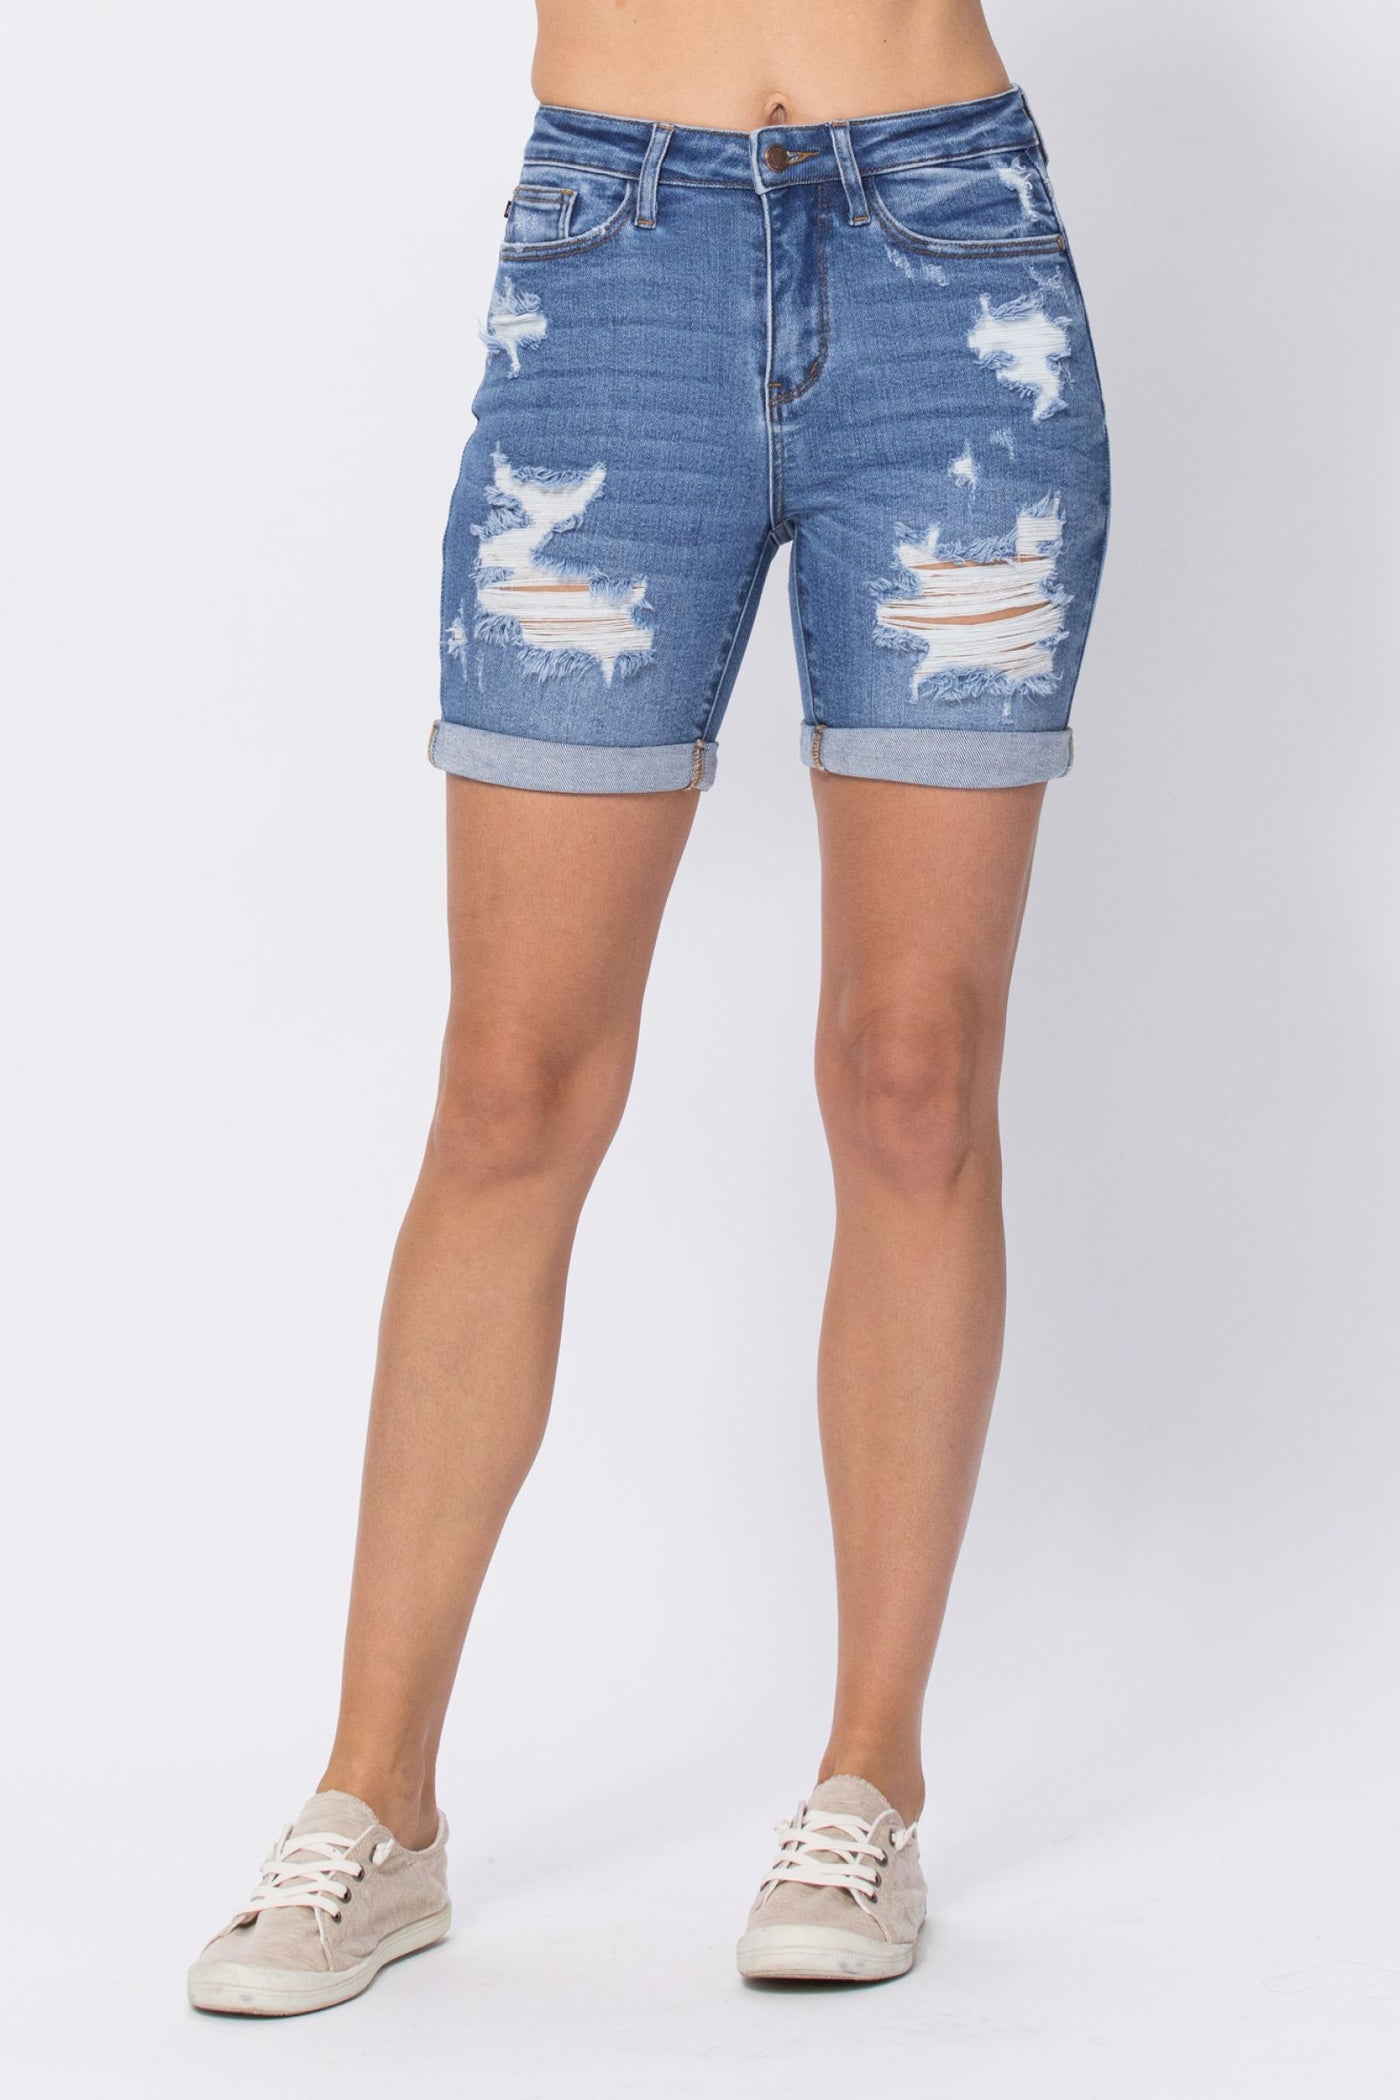 Judy Blue High Rise Cuffed Shorts - Corinne Boutique Family Owned and Operated USA